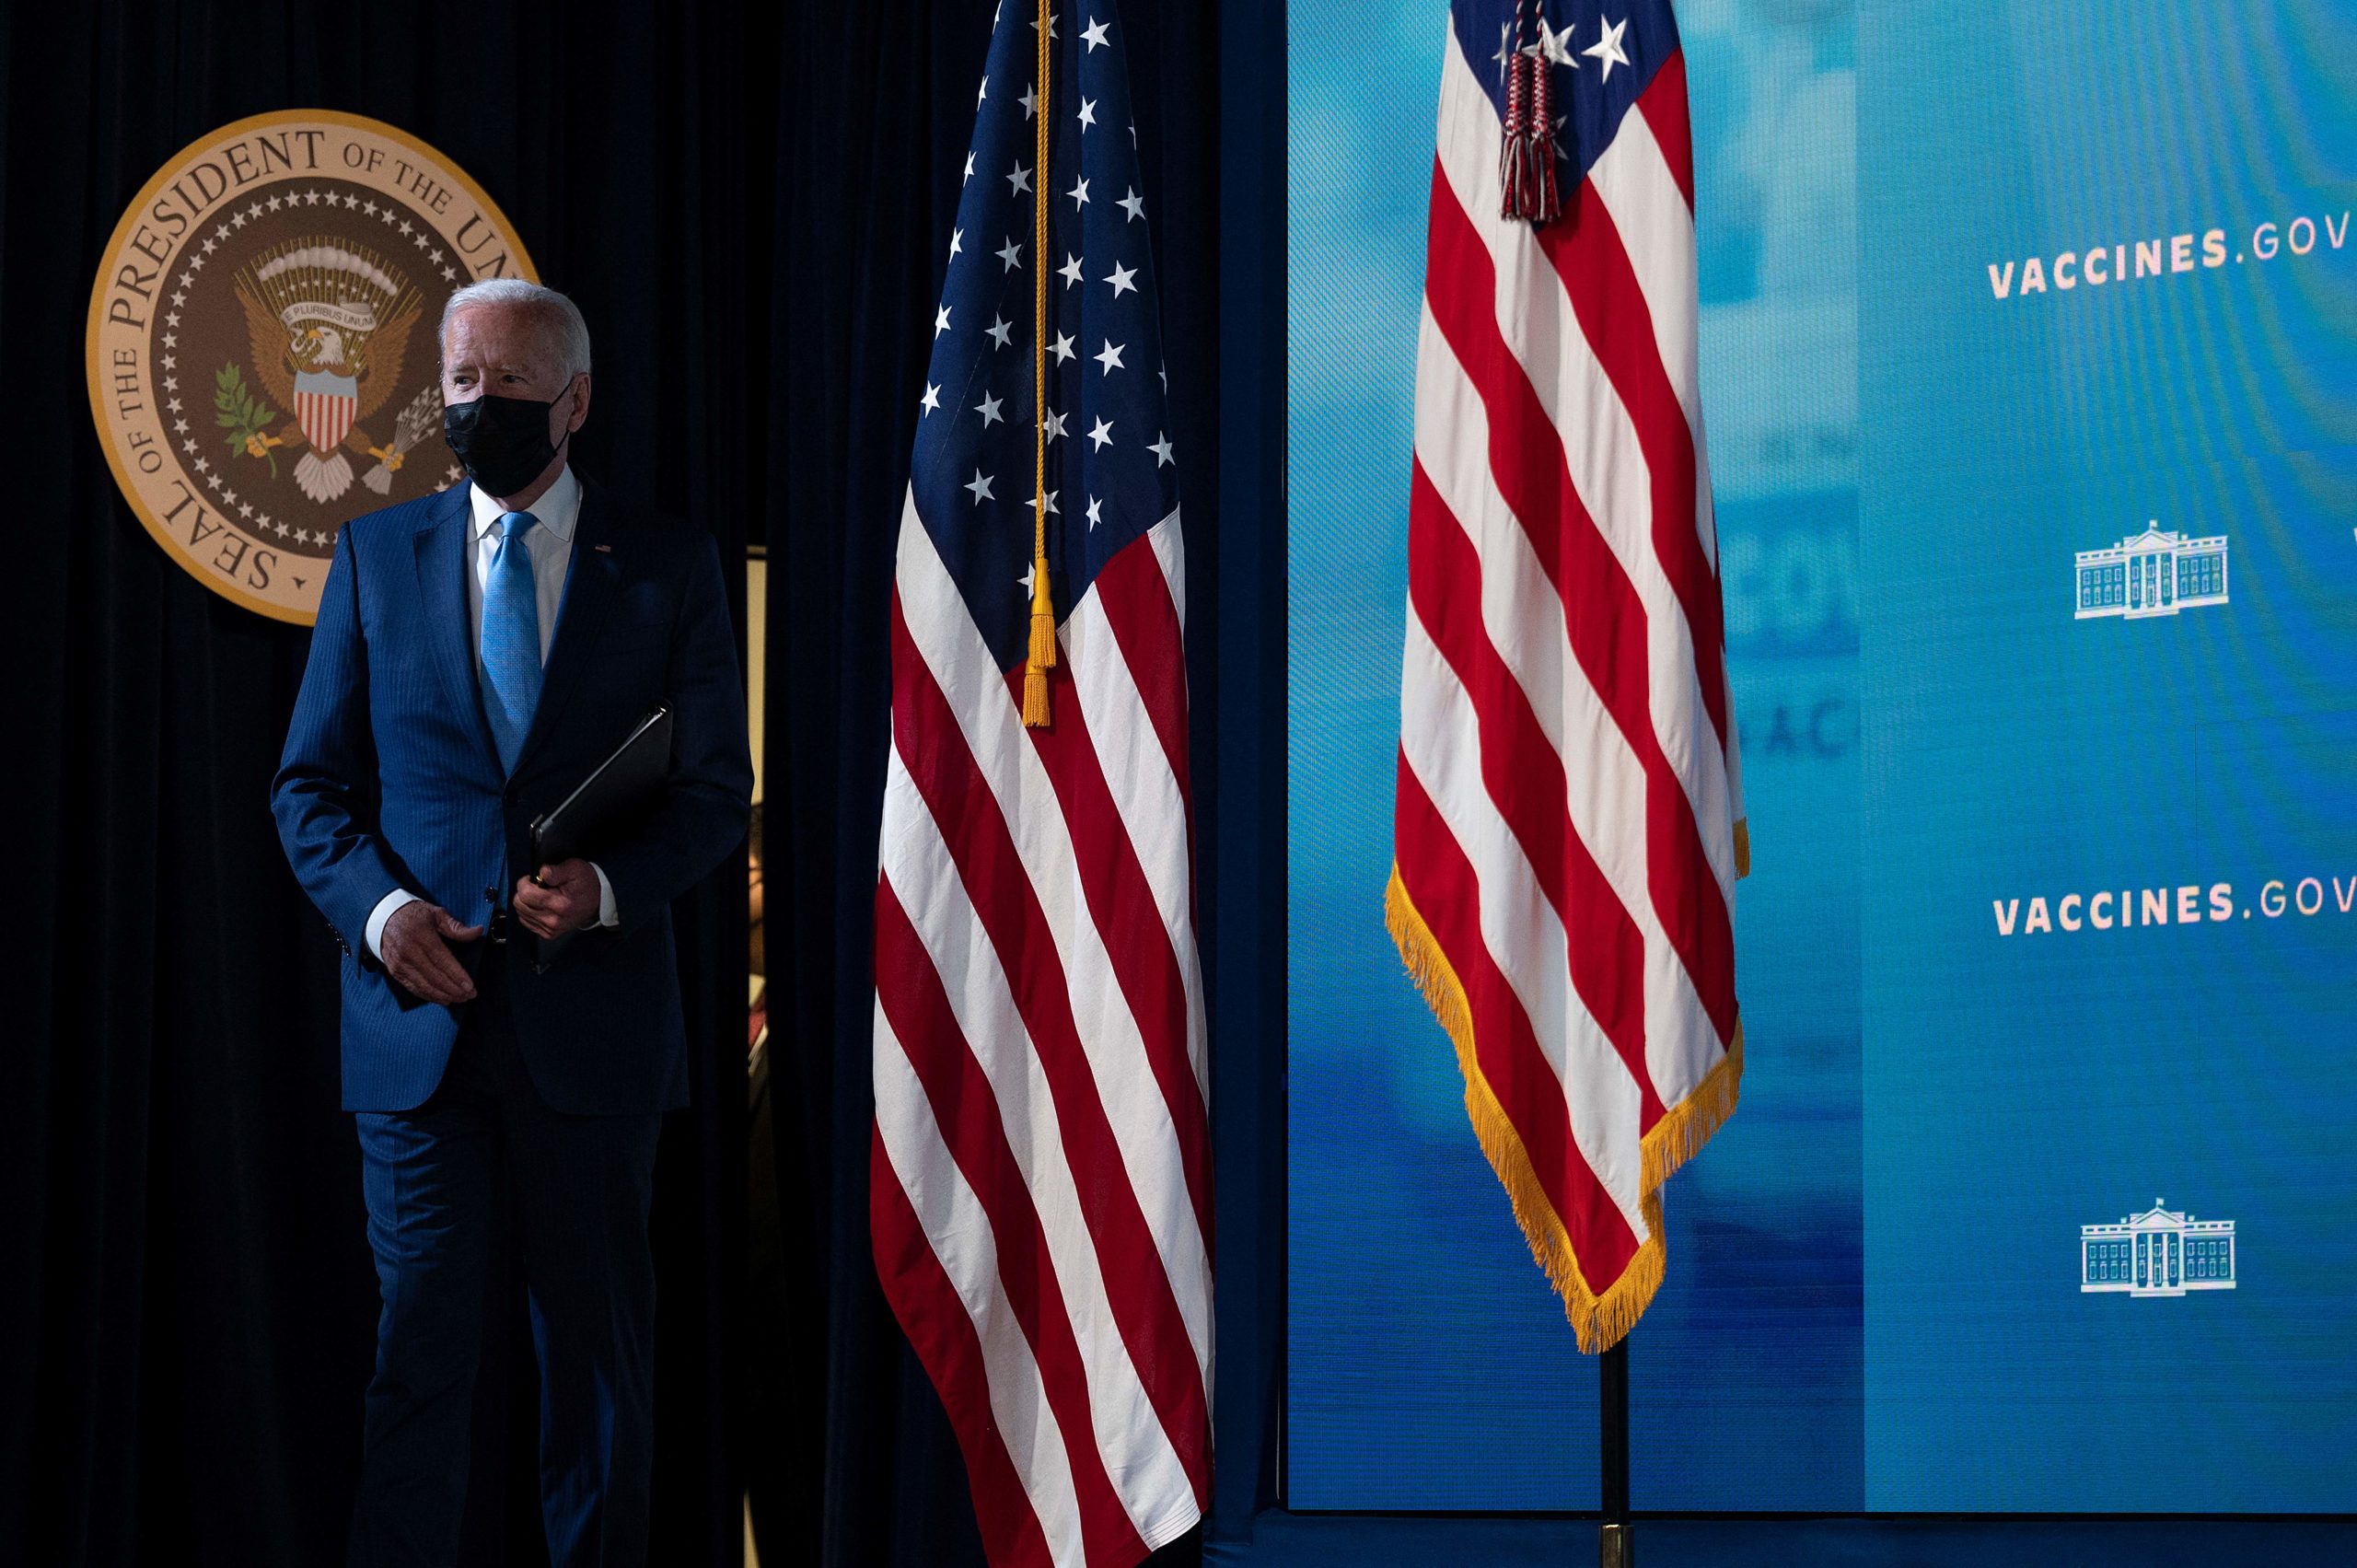 President Joe Biden arrives to deliver remarks on the COVID-19 response and the vaccination program on Aug. 23 at the White House. (Jim Watson/AFP via Getty Images)